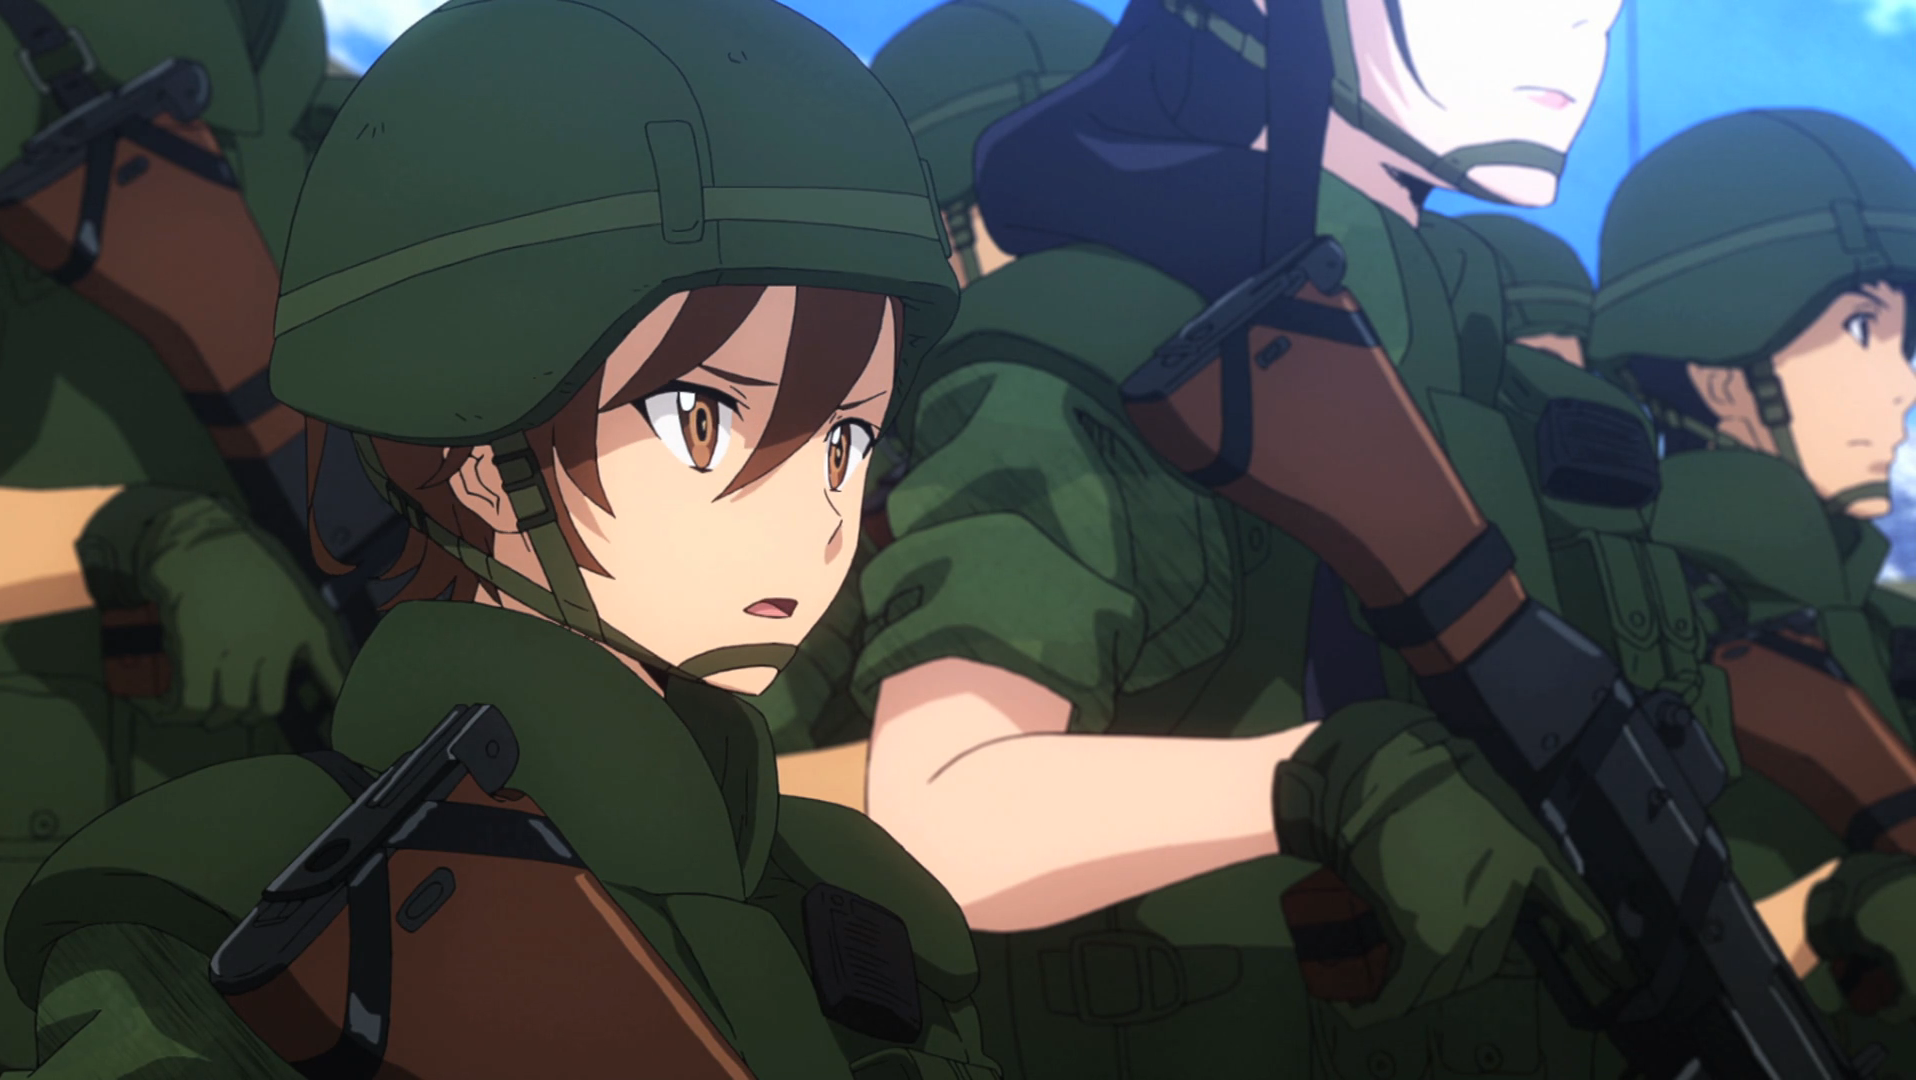 Gate Thus the JSDF Fought There Episode 15 Review - Crow's World of Anime